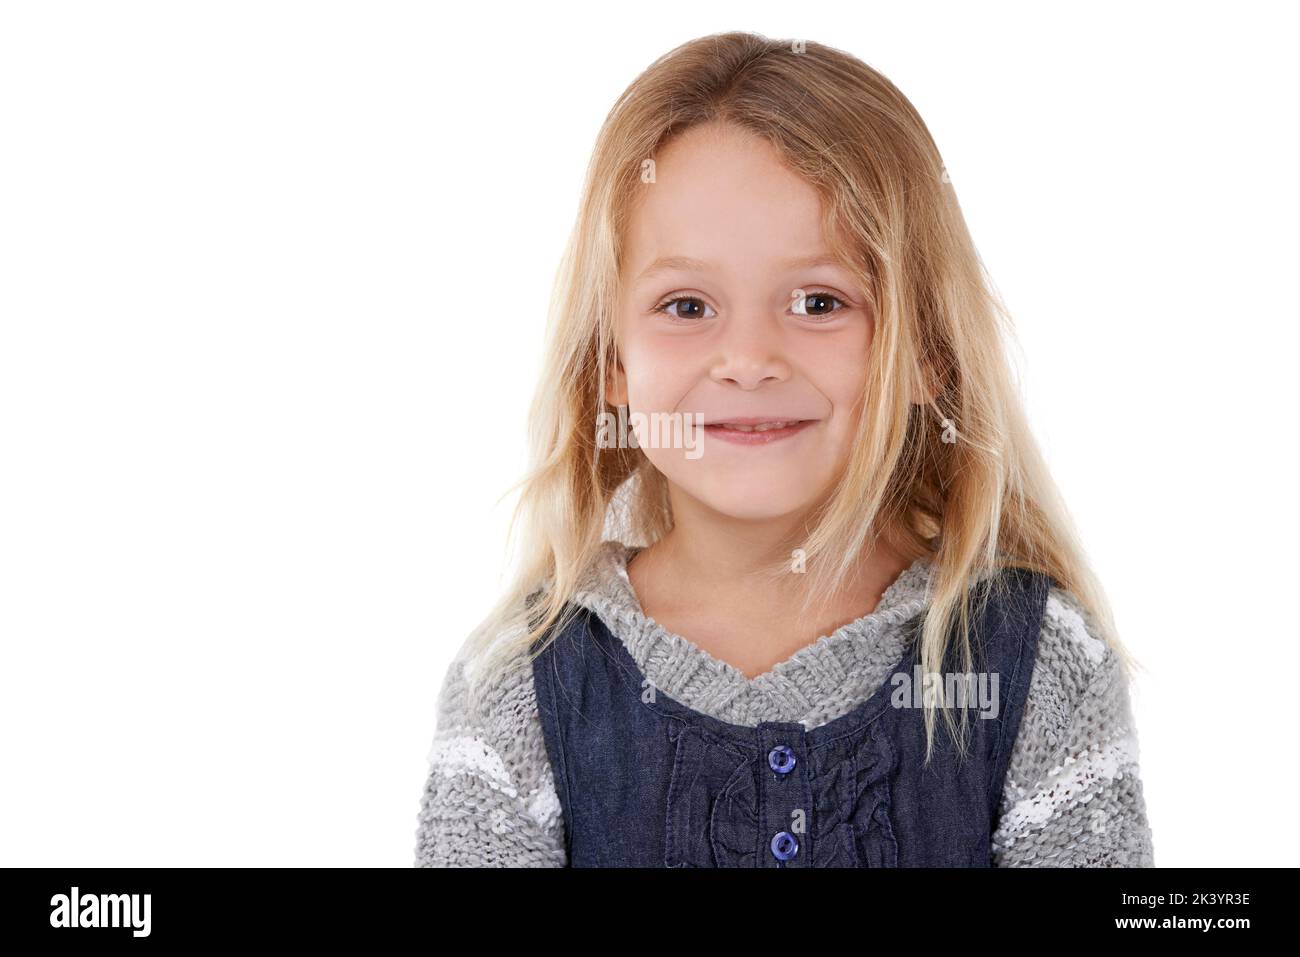 This little girl does things her own way. Portrait of an adorable little girl. Stock Photo